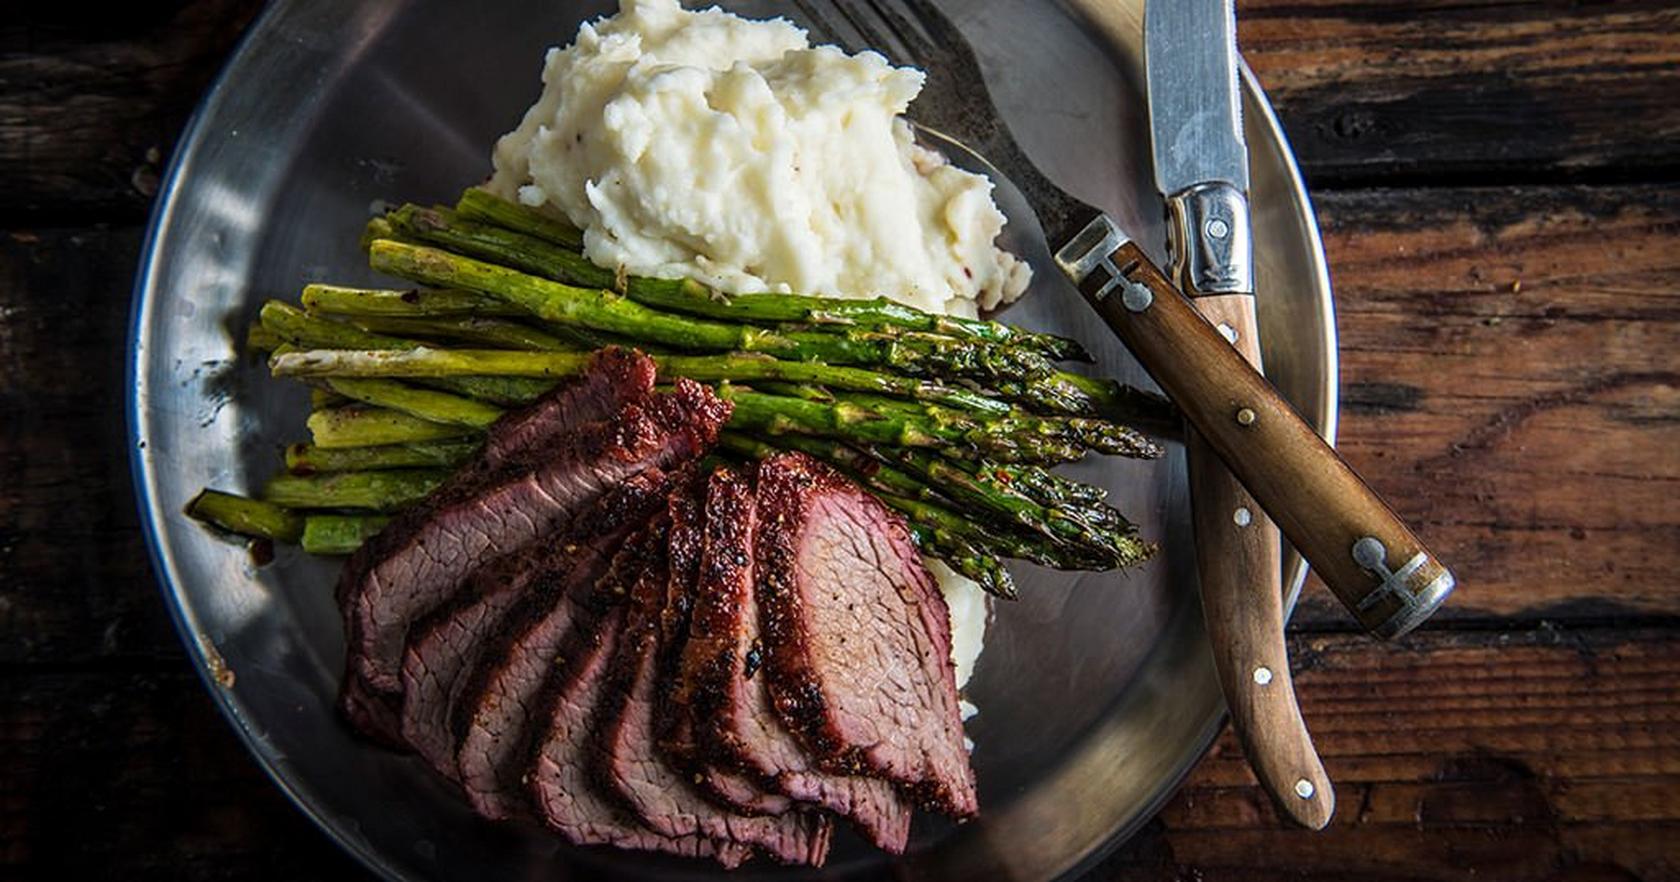 Grilled Tri-Tip with Garlic Mashed Potatoes